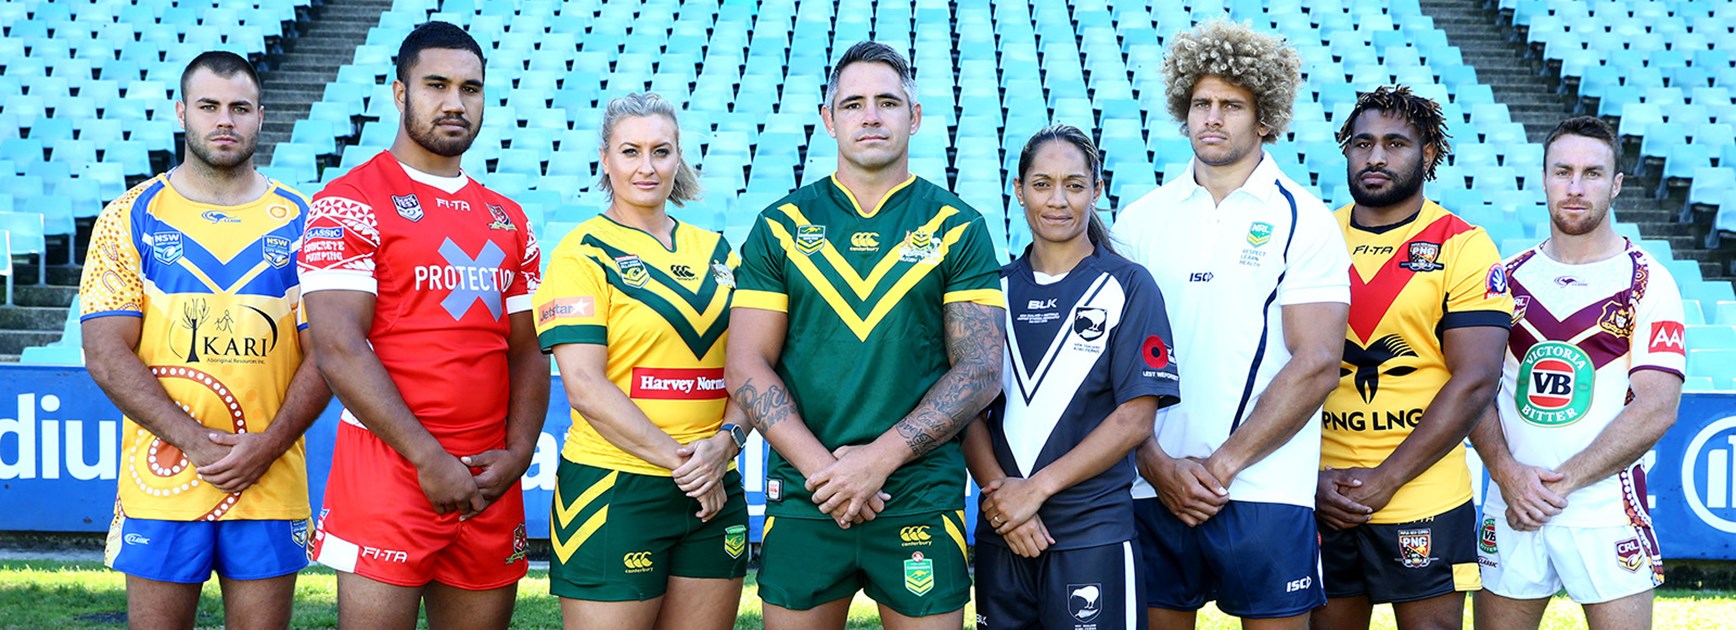 The NRL has unveiled a series of resources to stand up, speak out and take action against dome